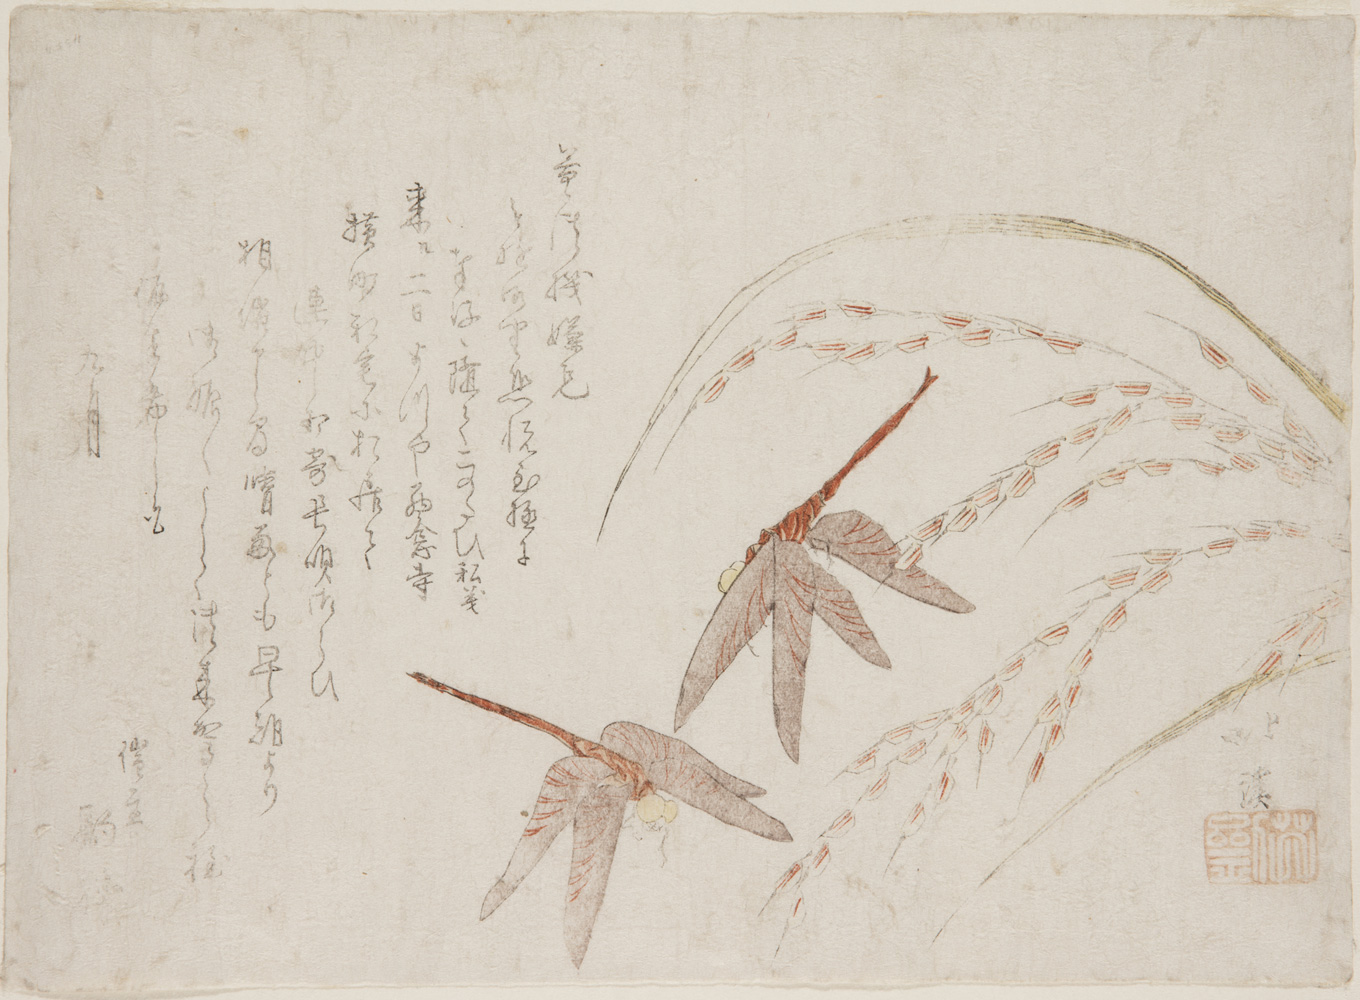 Japanese print of two flying dragonflies and grasses bending behind them.